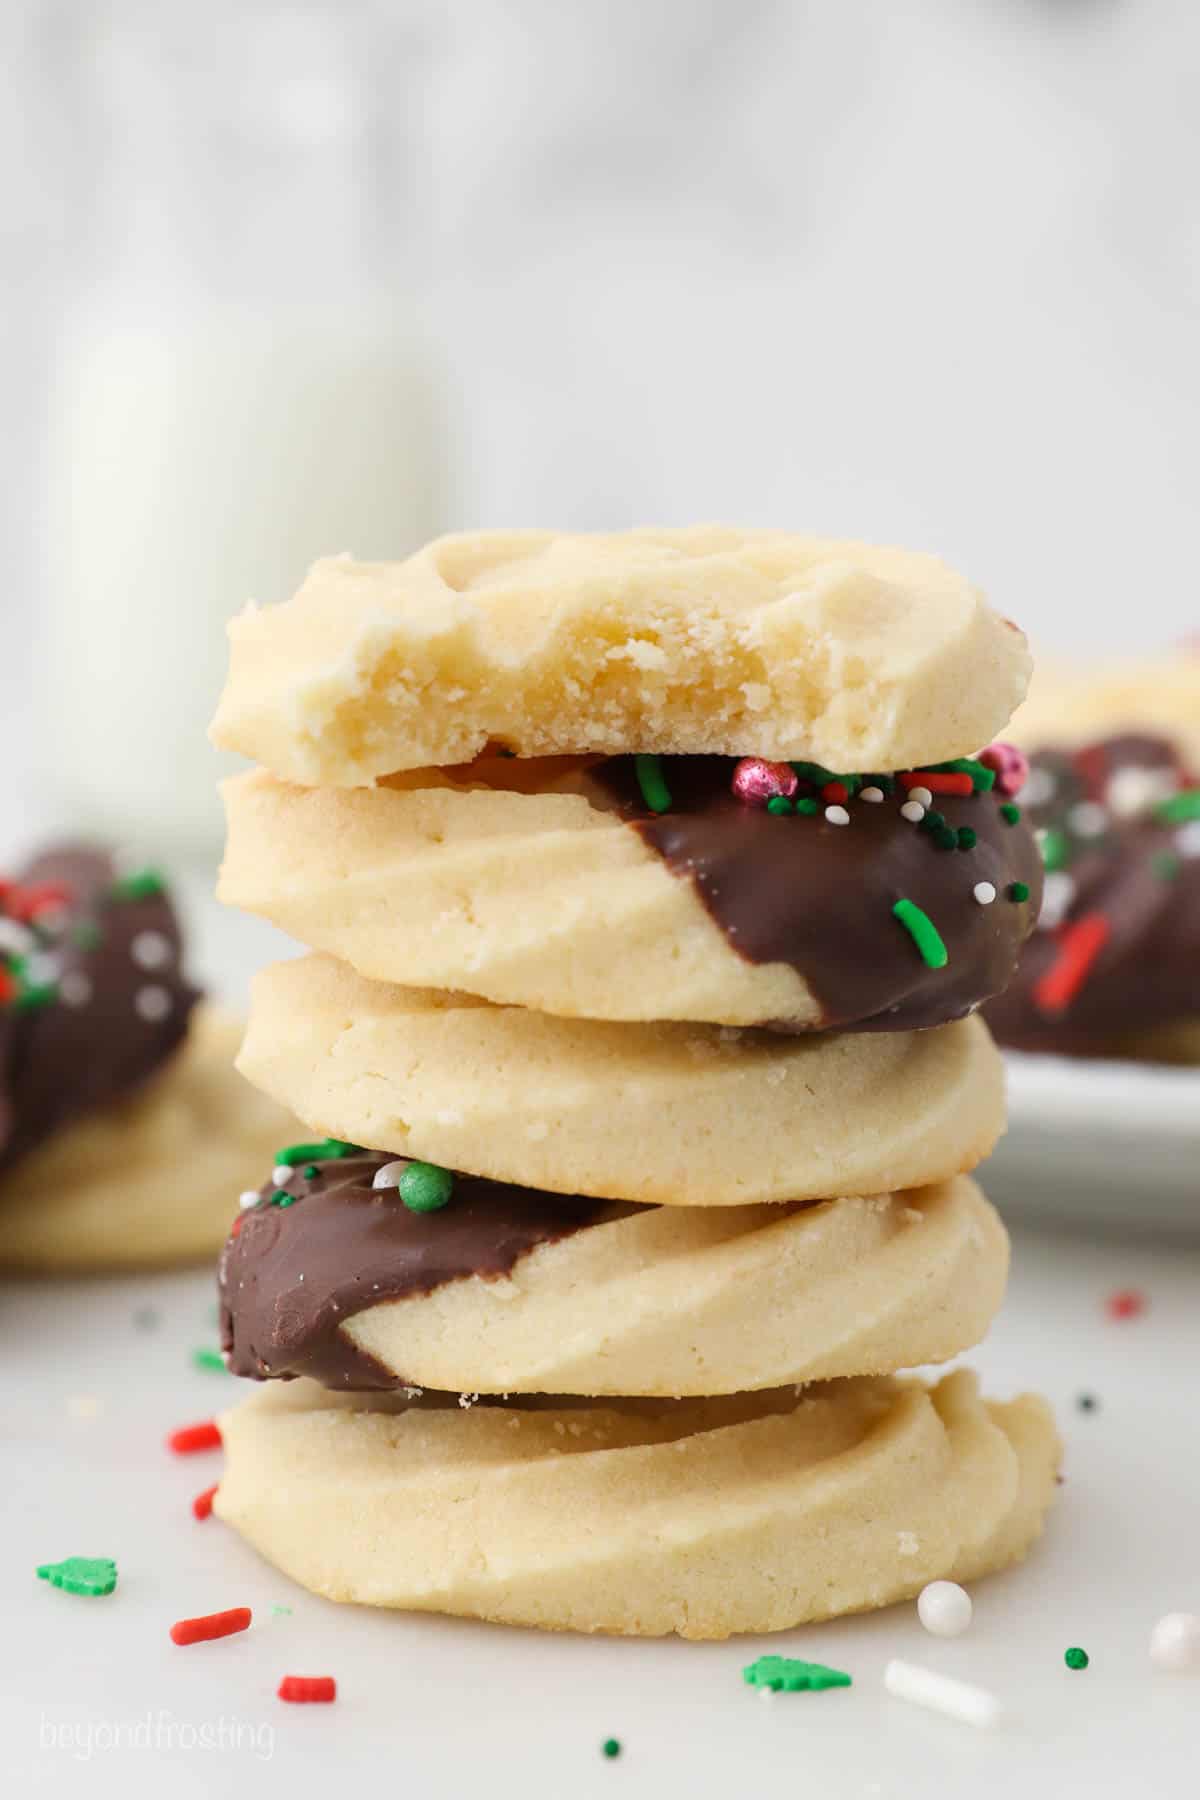 A stack of five butter cookies, two of which are decorated with chocolate and sprinkles